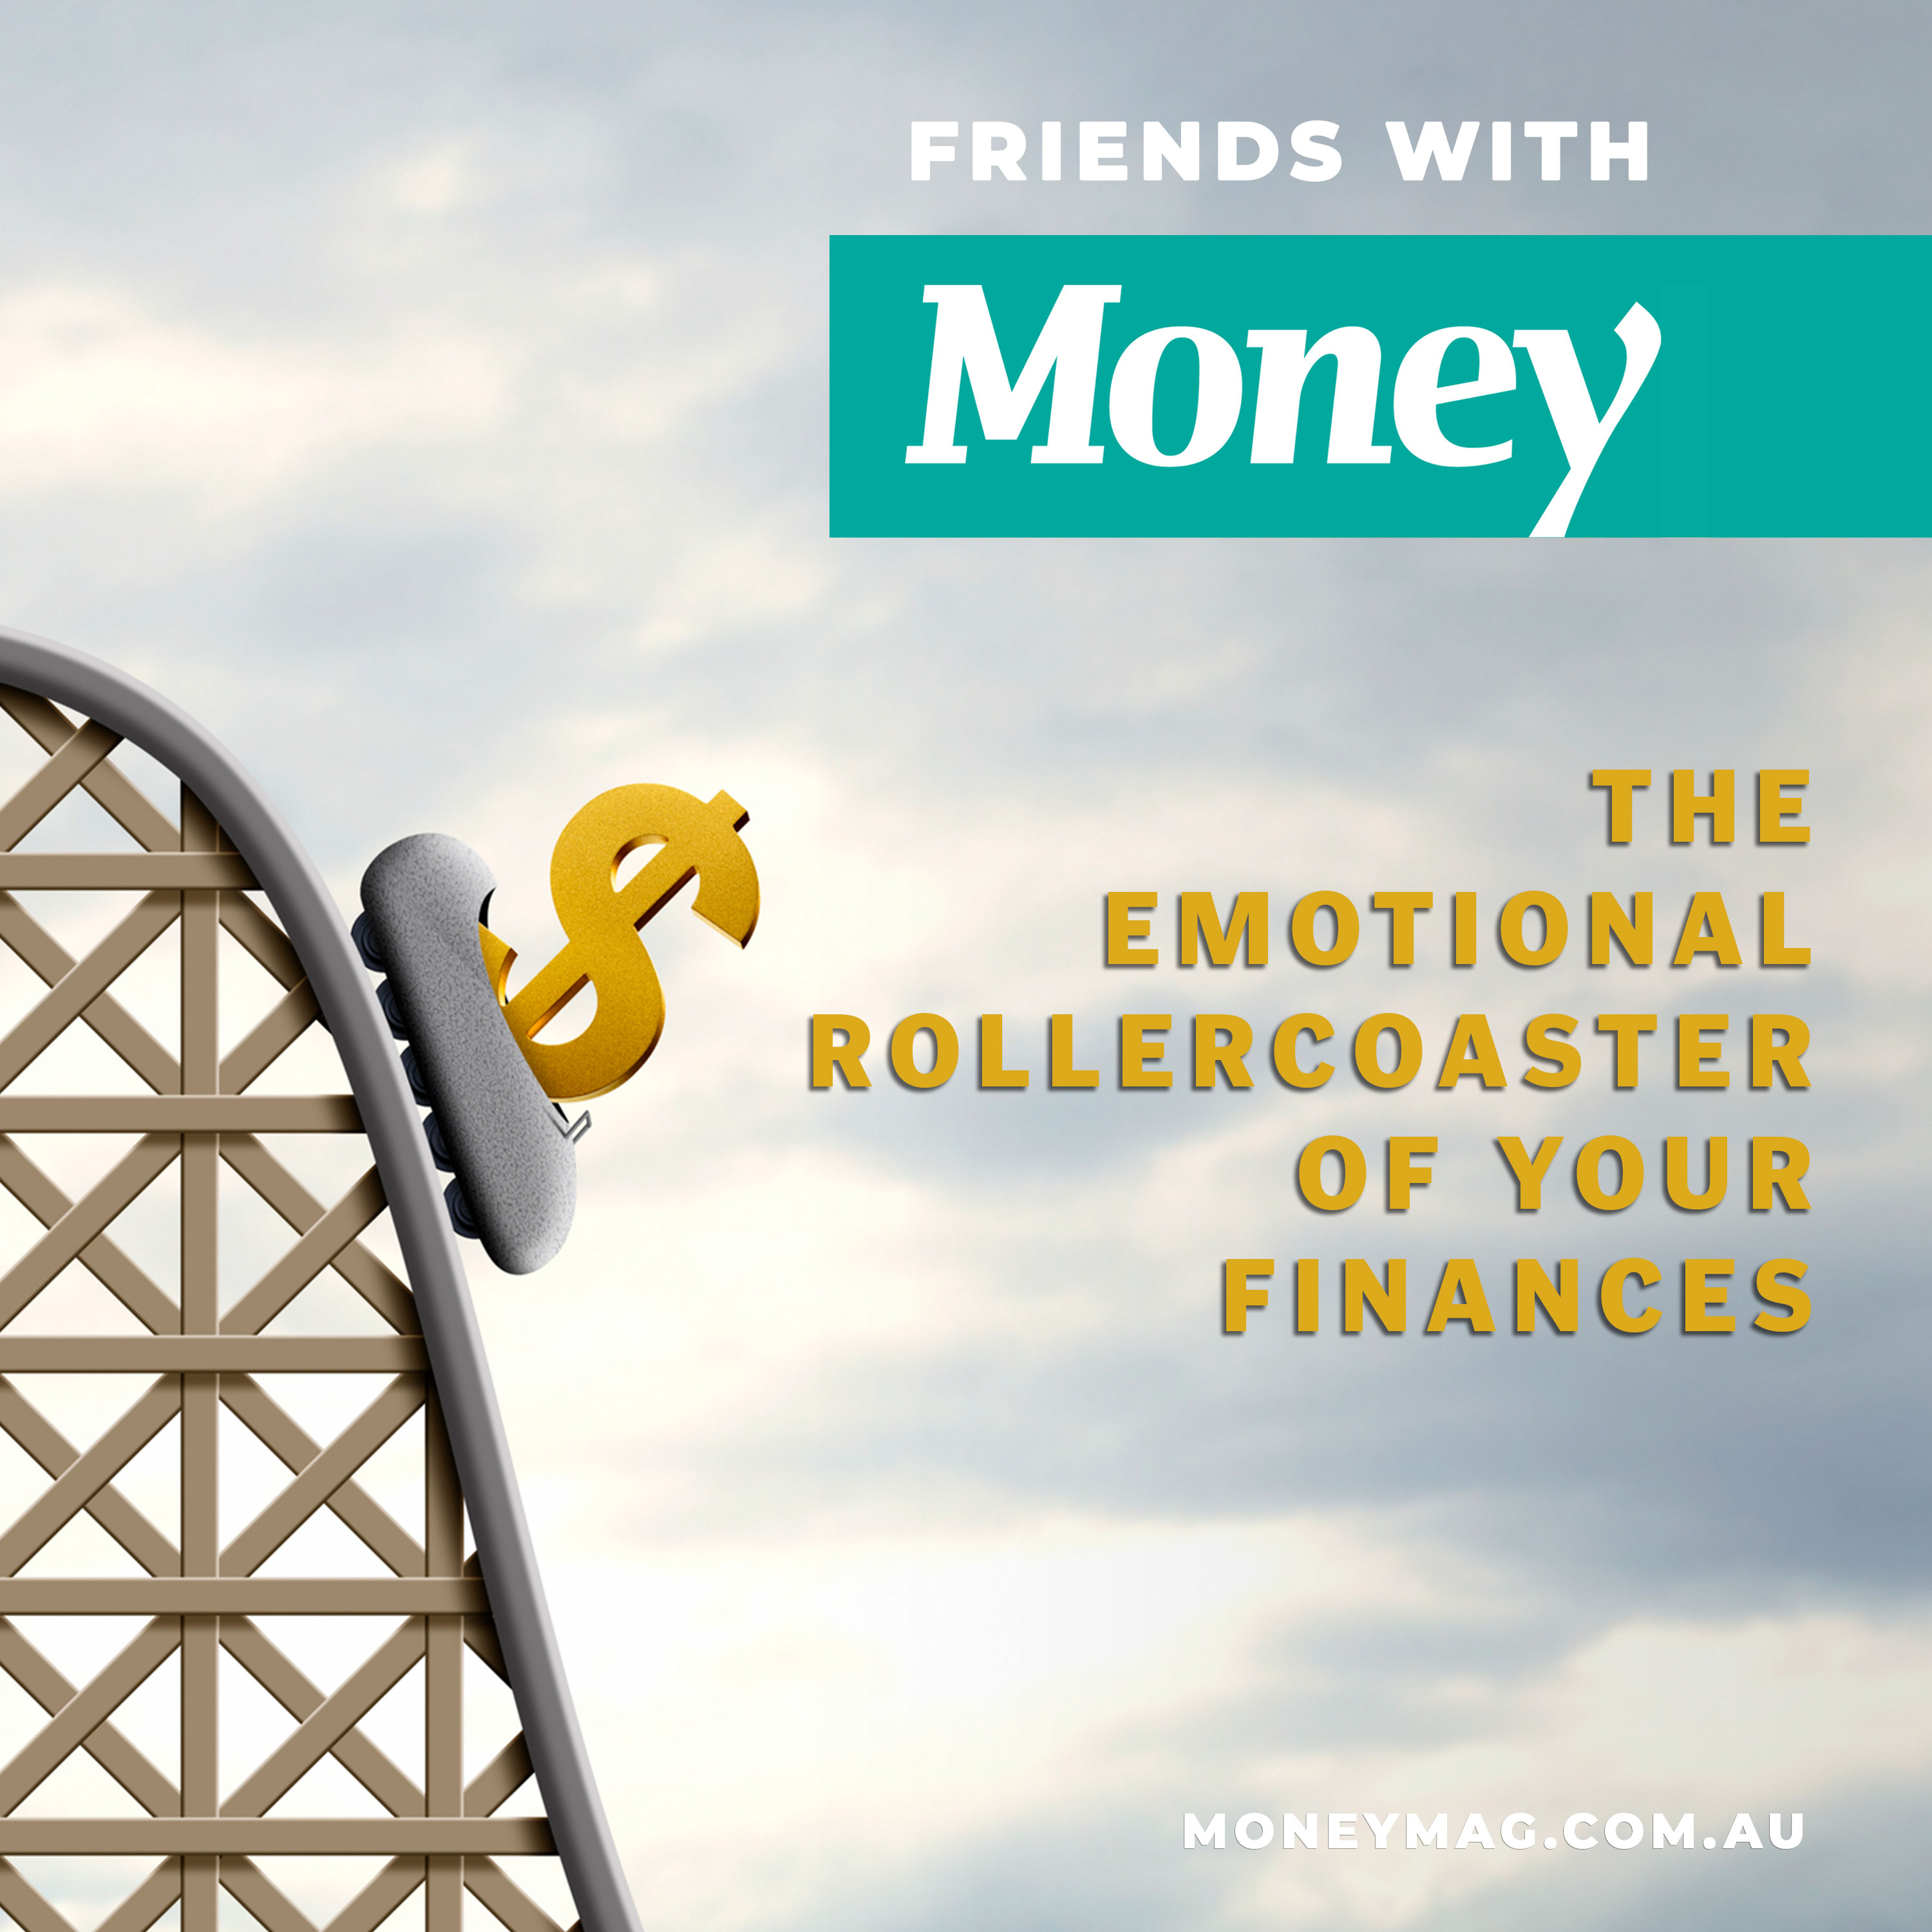 The emotional rollercoaster of your finances